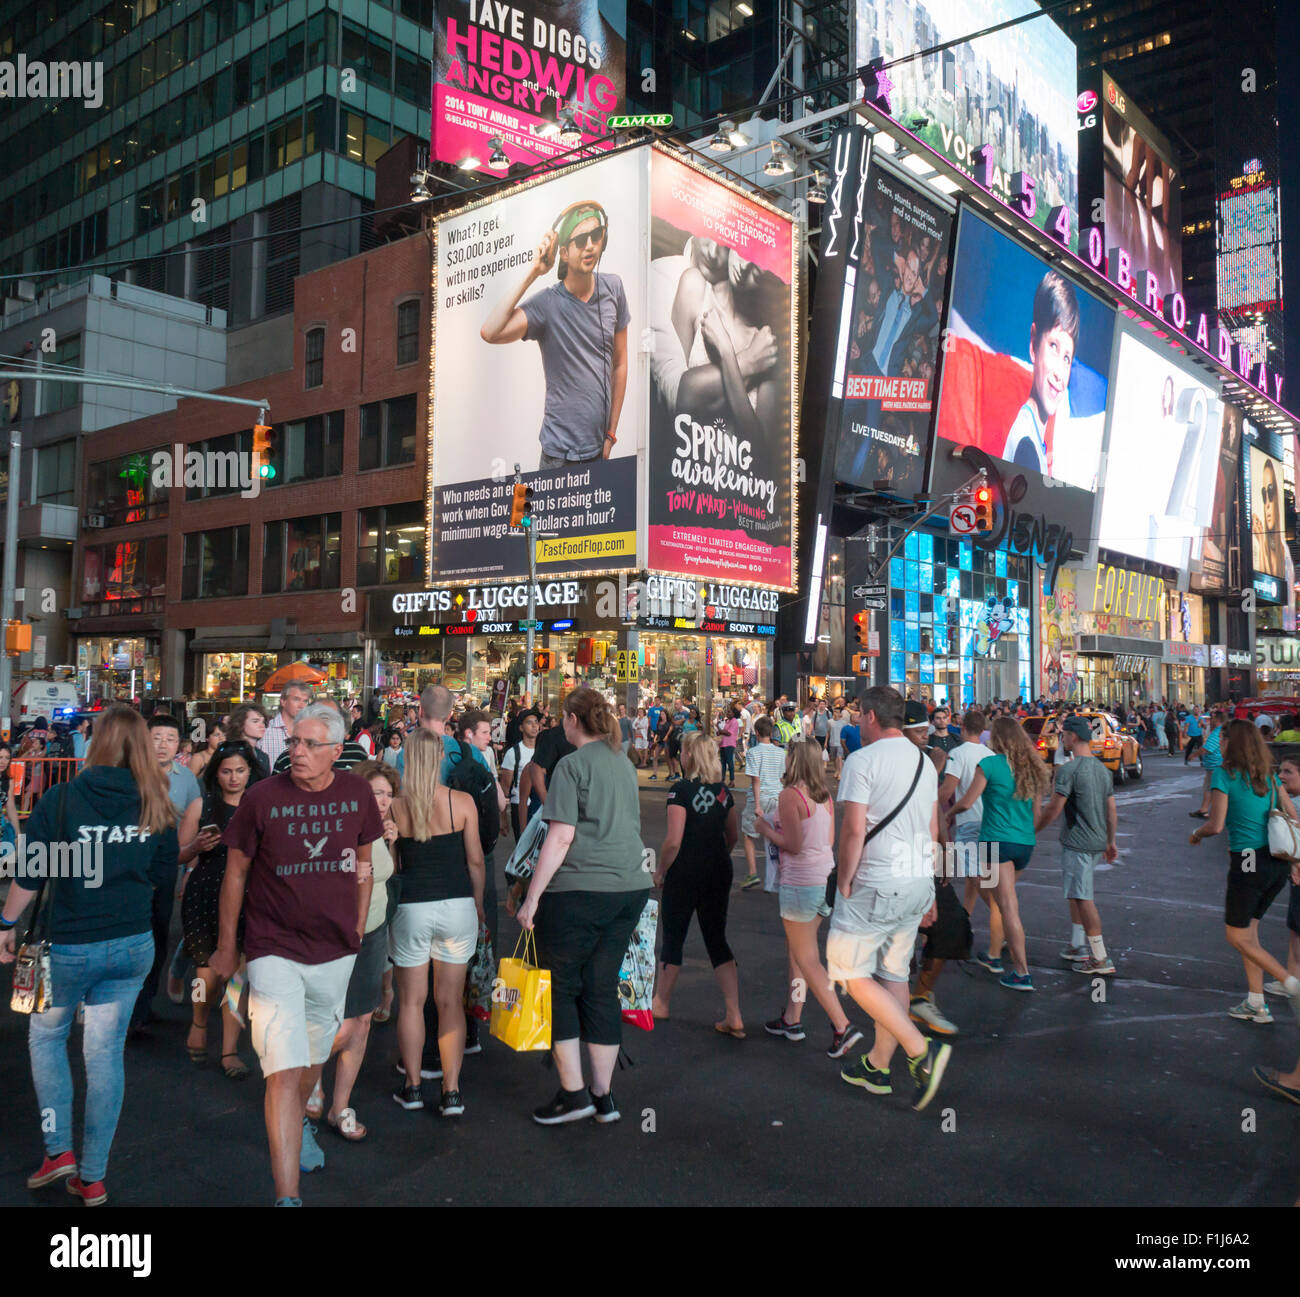 A billboard in Times Square in New York pokes fun at the push to raise the minimum wage to $15 per hour for fast food workers, seen on Wednesday, August 26, 2015. The advertisement is from the Employment Policies Institute and is part of their campaign entitled Fast Food Flop contending that the $15 wage devalues the work of employees who have worked hard to achieve that wage.  (© Richard B. Levine) Stock Photo